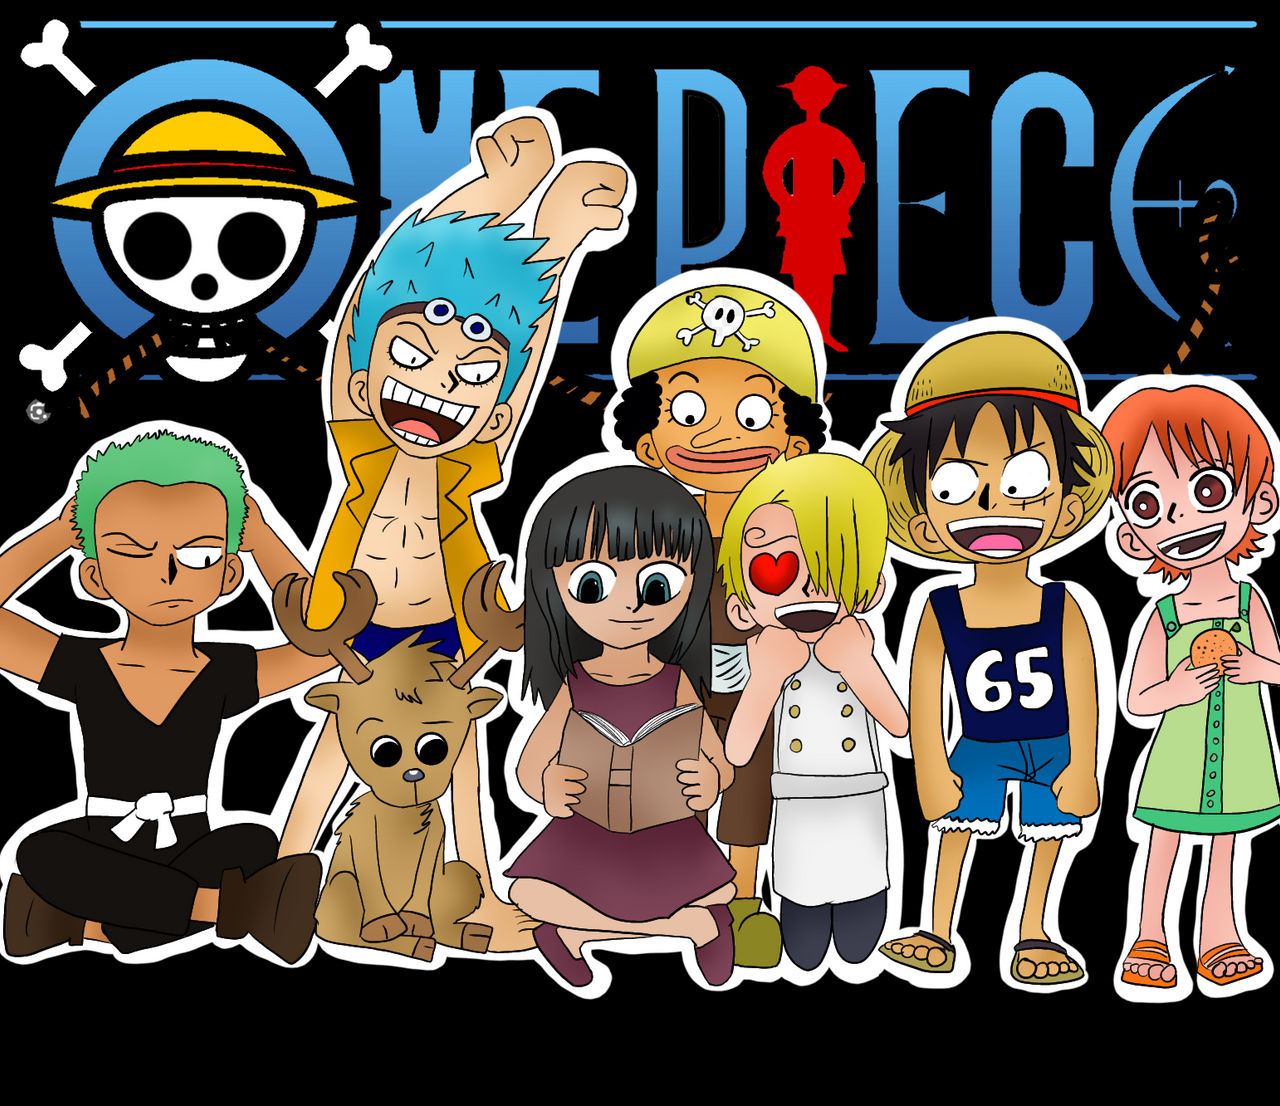 One Piece - Merry by OnePieceWorldProject on deviantART